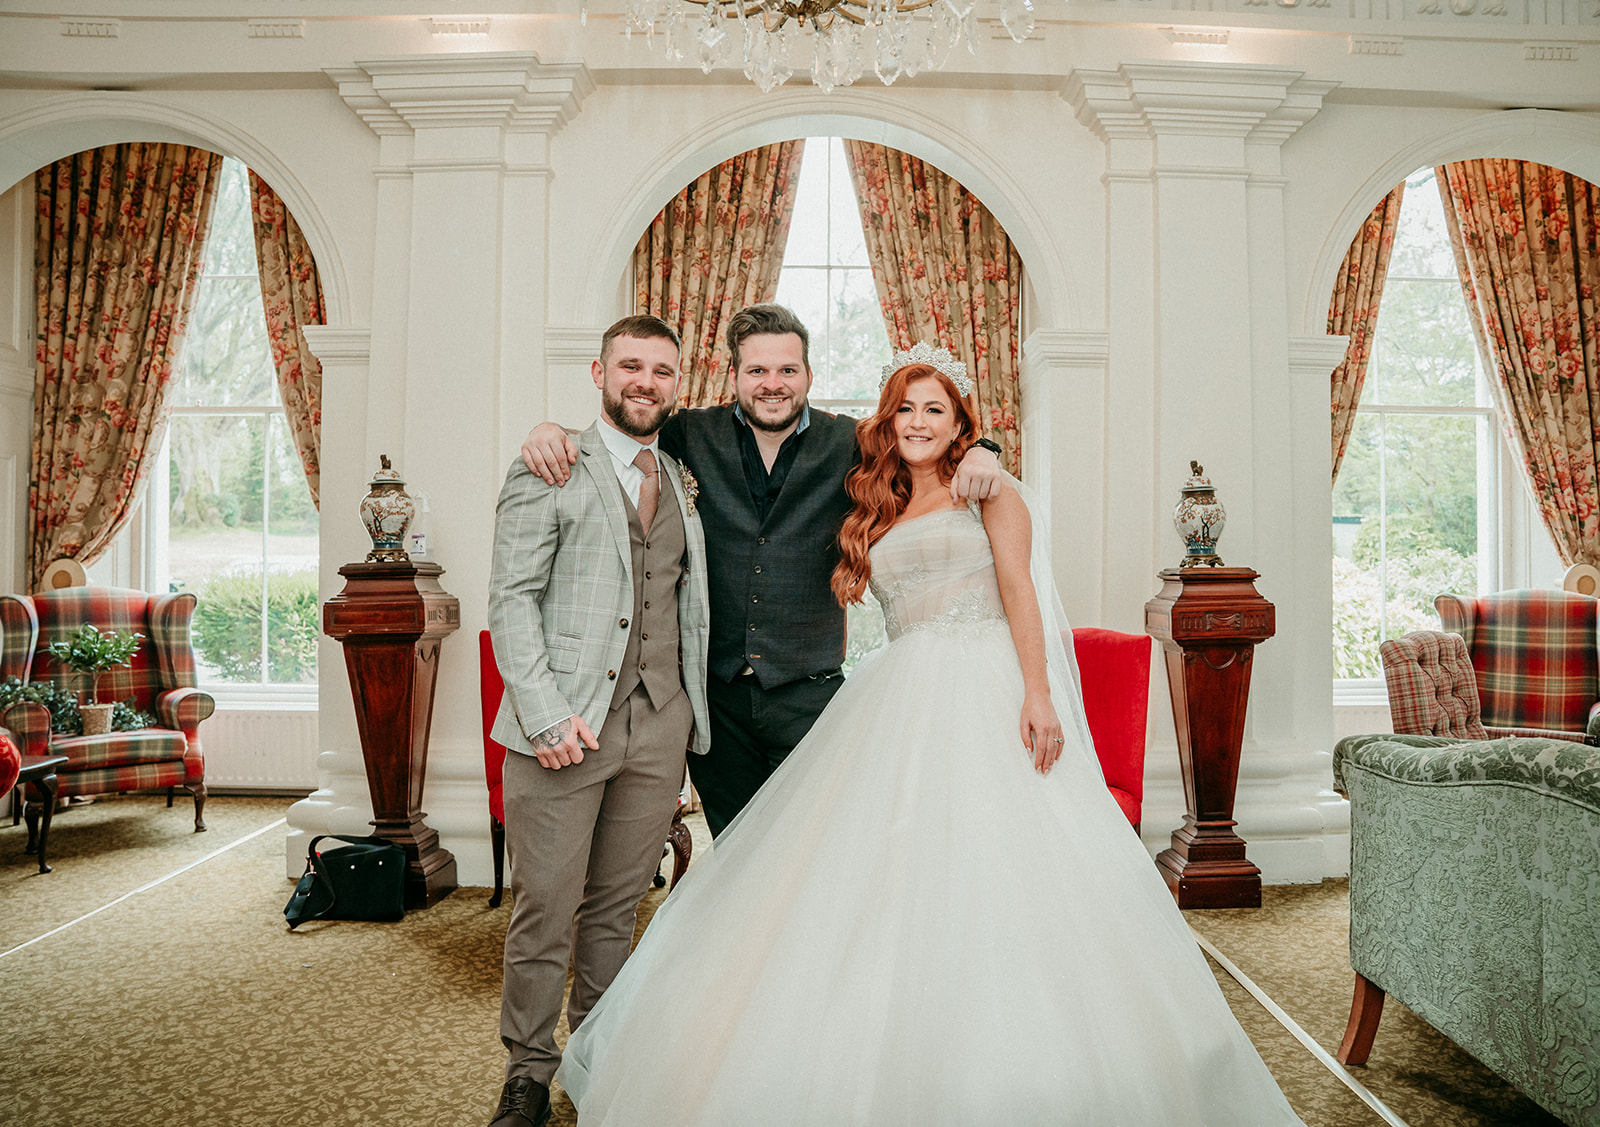 James Aiken photography with newlyweds at the beech hill country house weddings